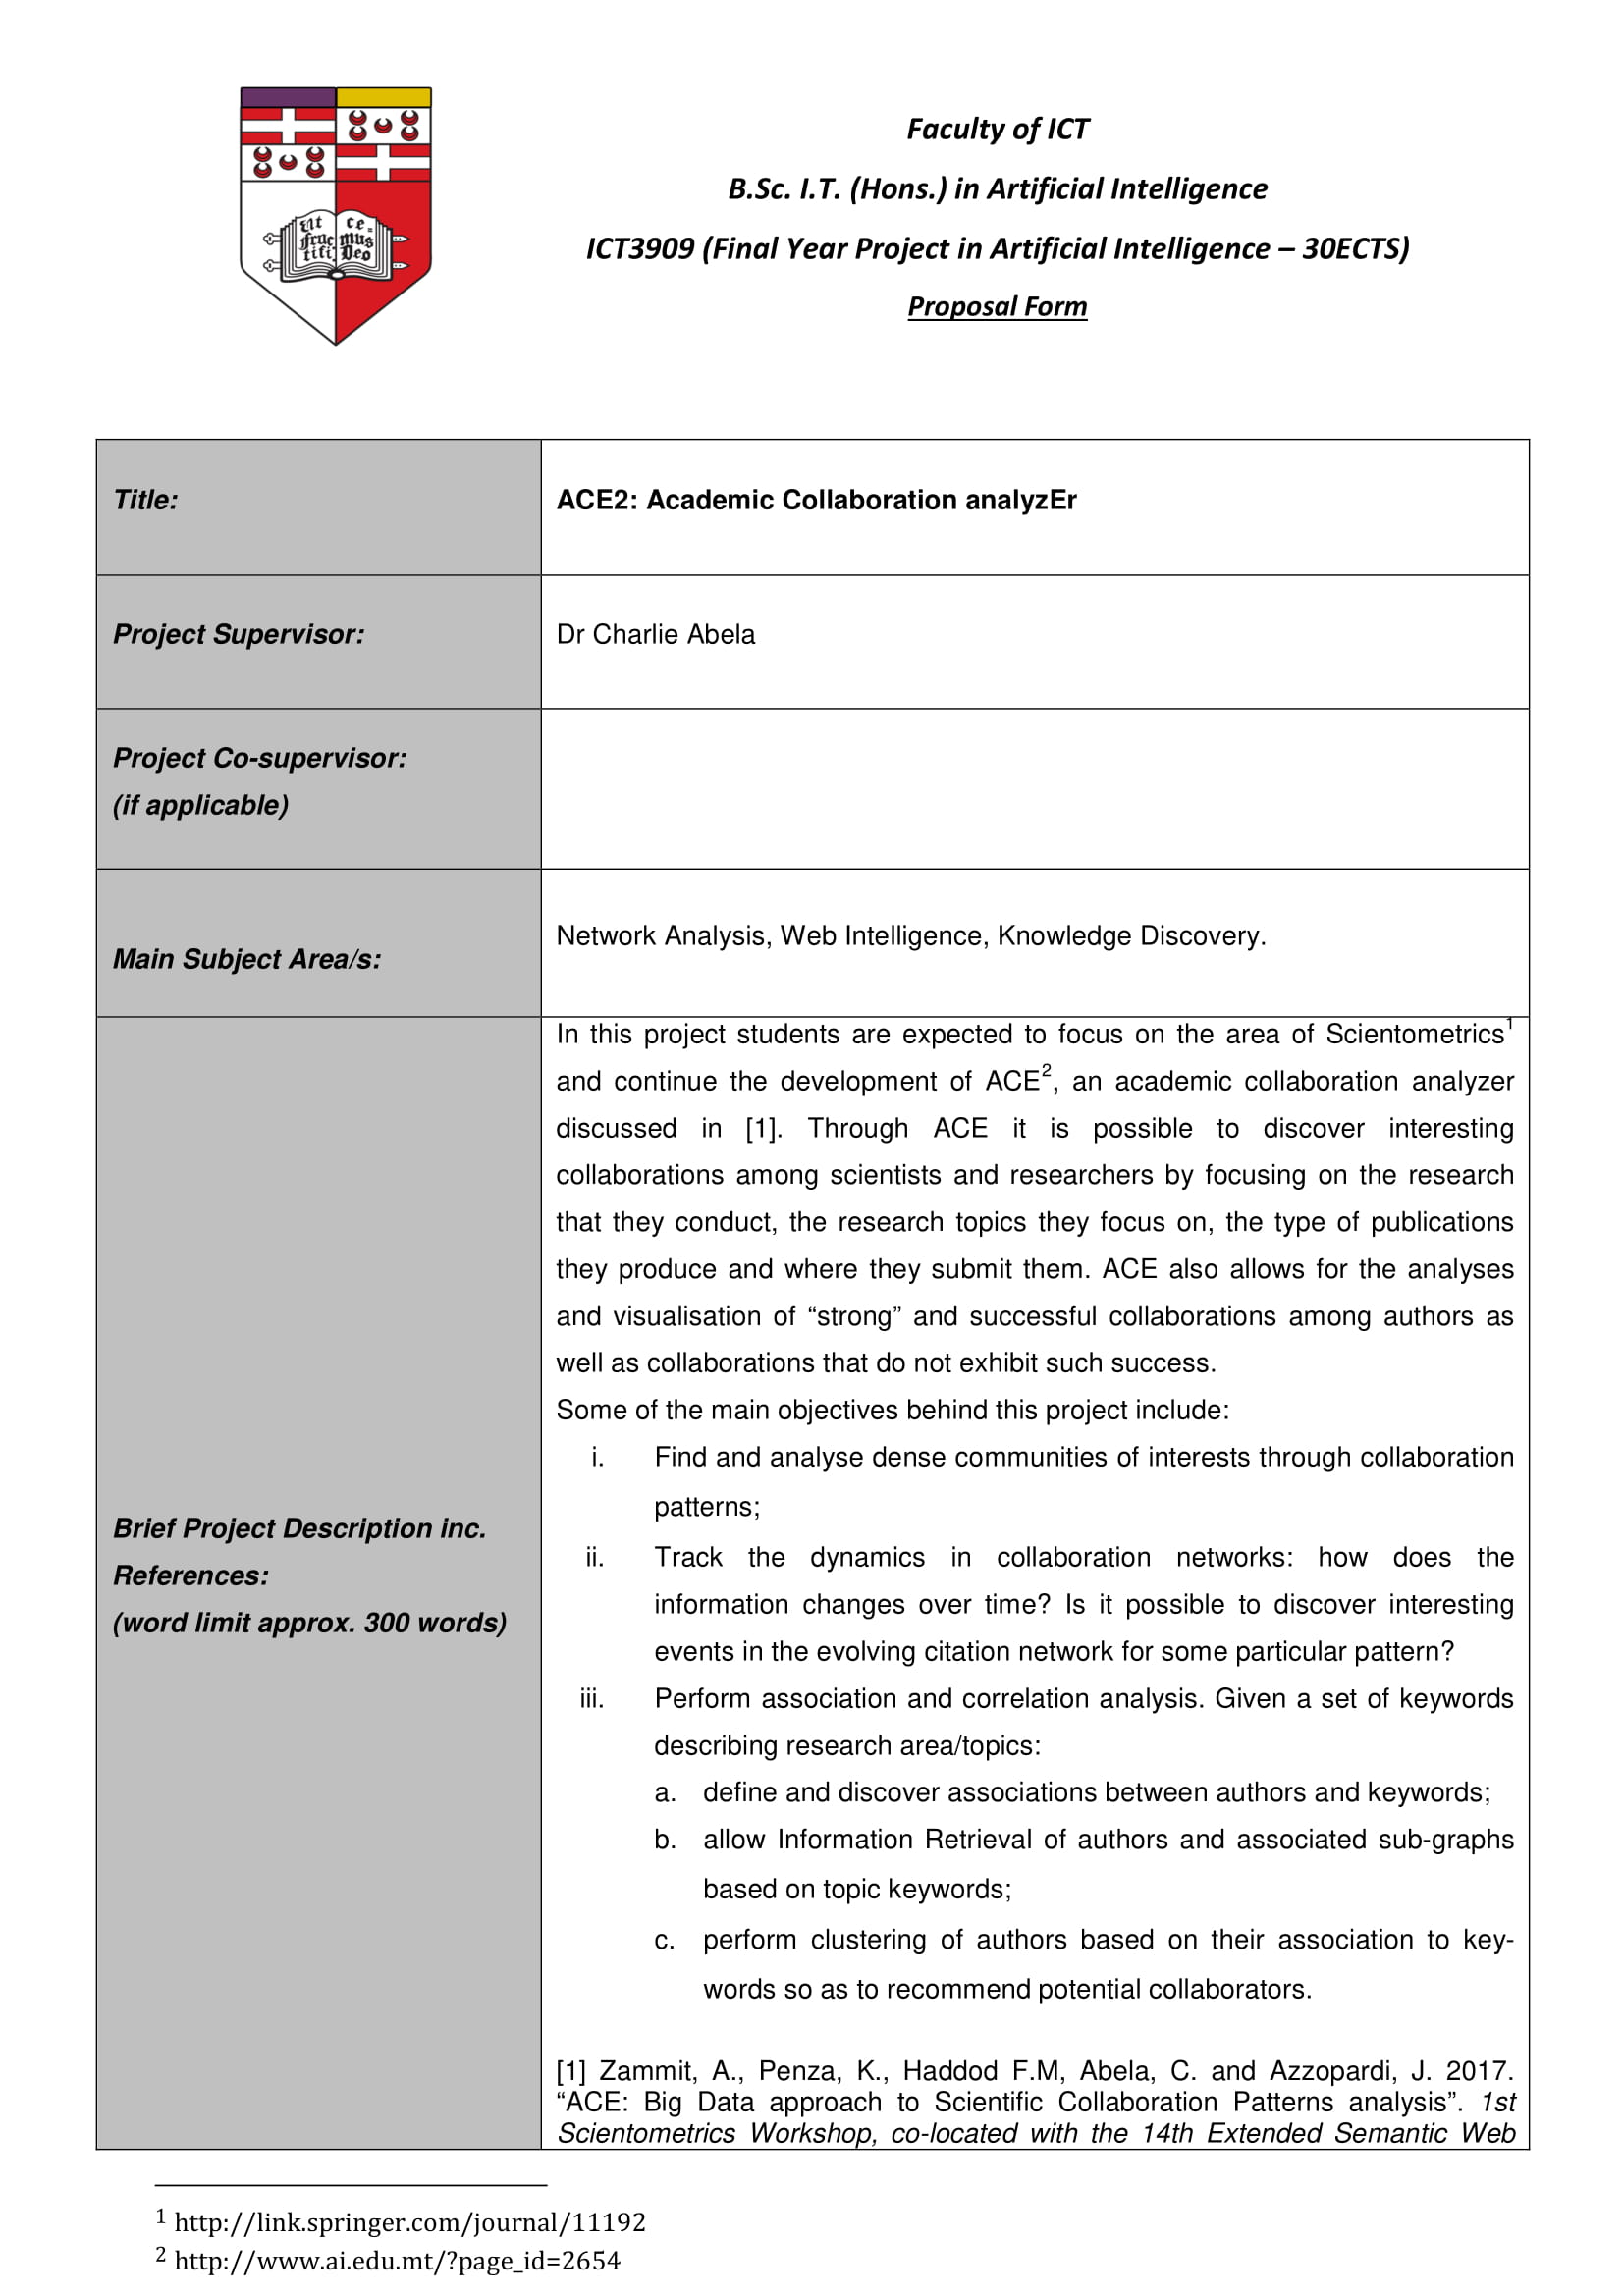 final year project proposal form example 01